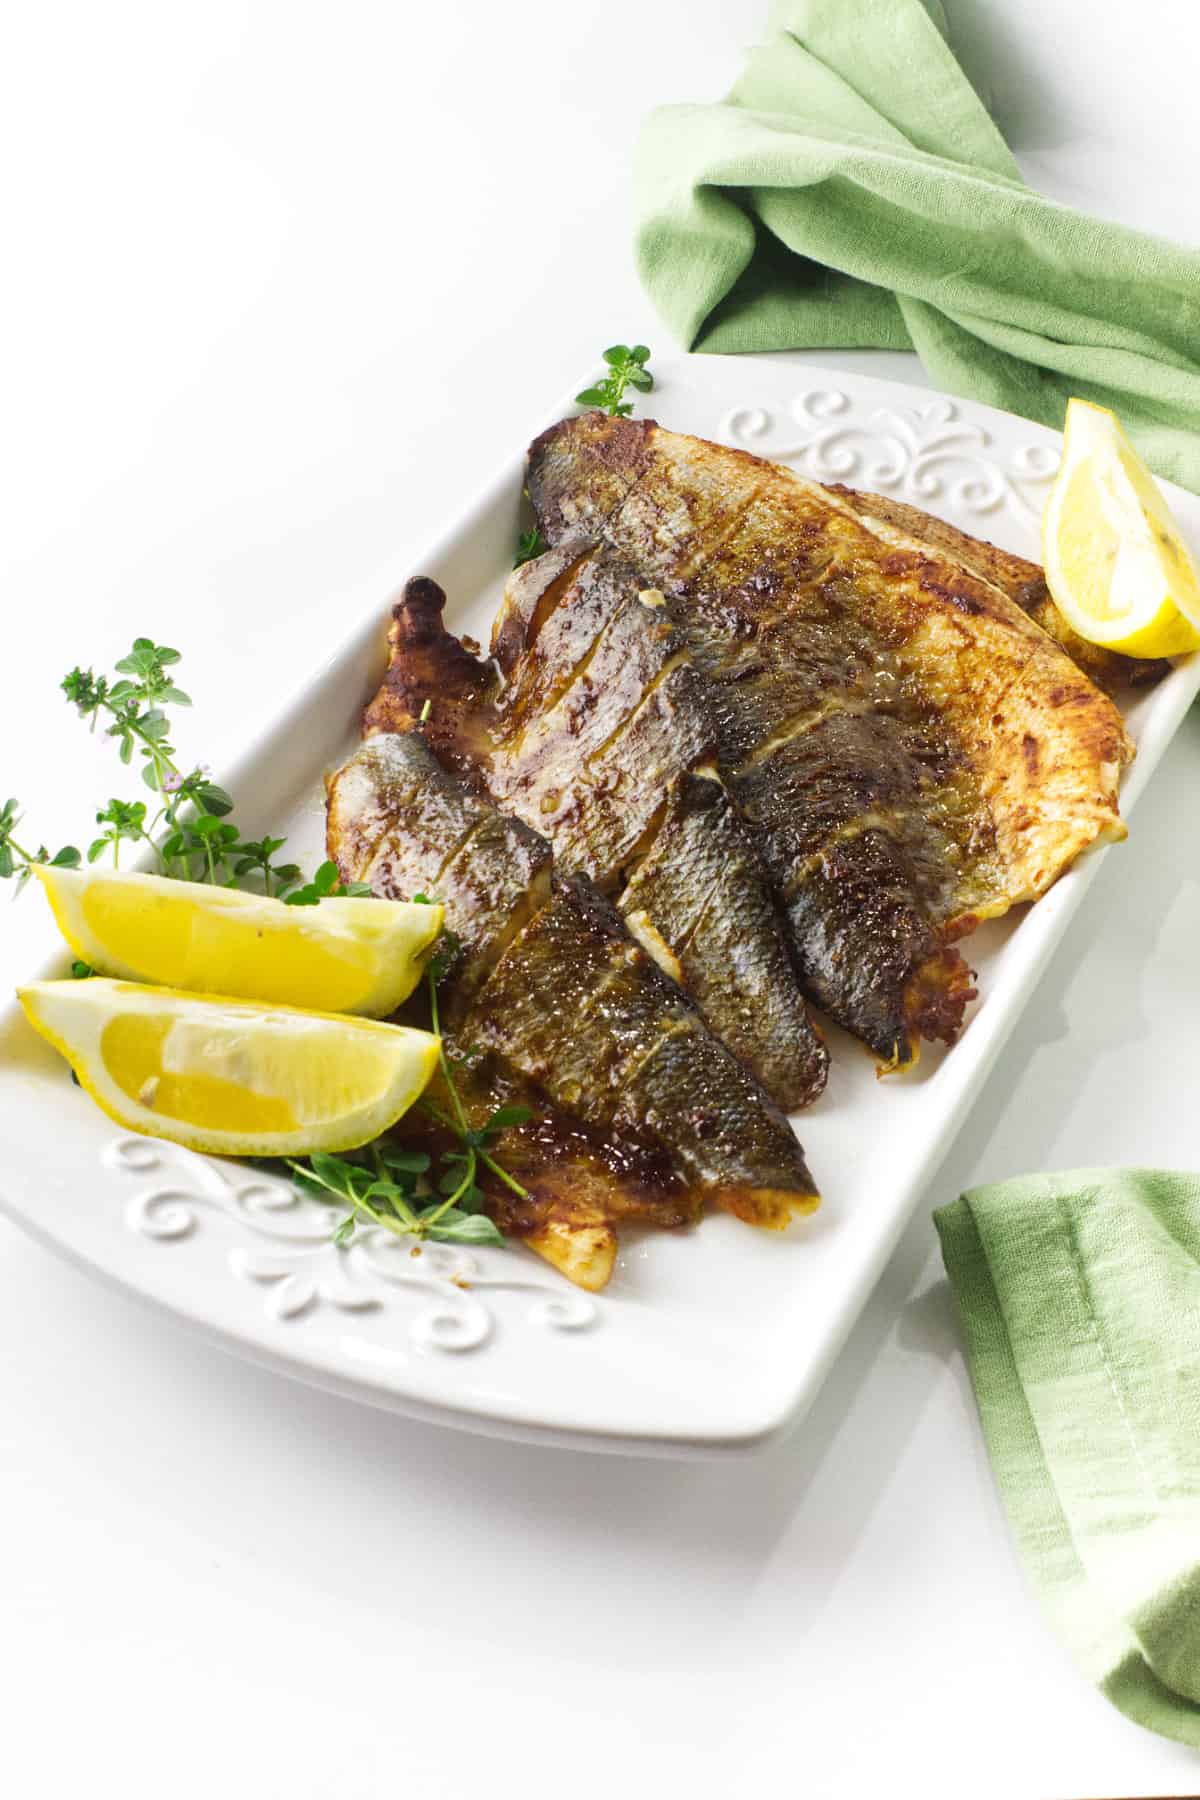 baked branzino glazed with miso sauce on a serving platter with lemon wedges.